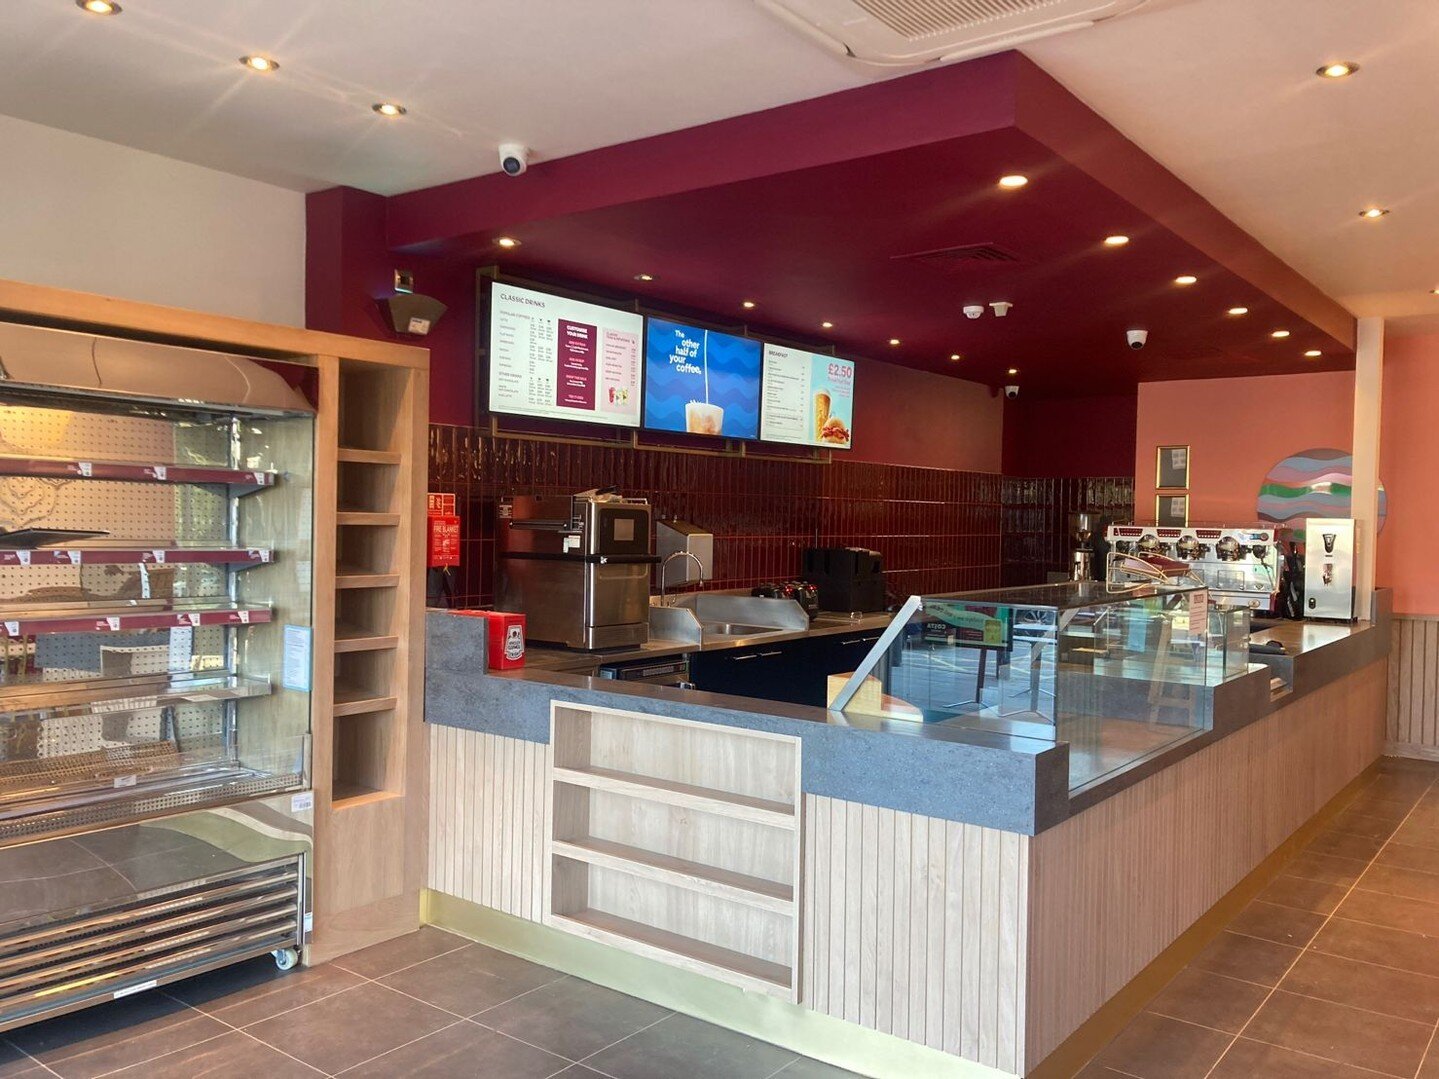 A quick little renewal project of the existing Costa Coffee in St Austell completed